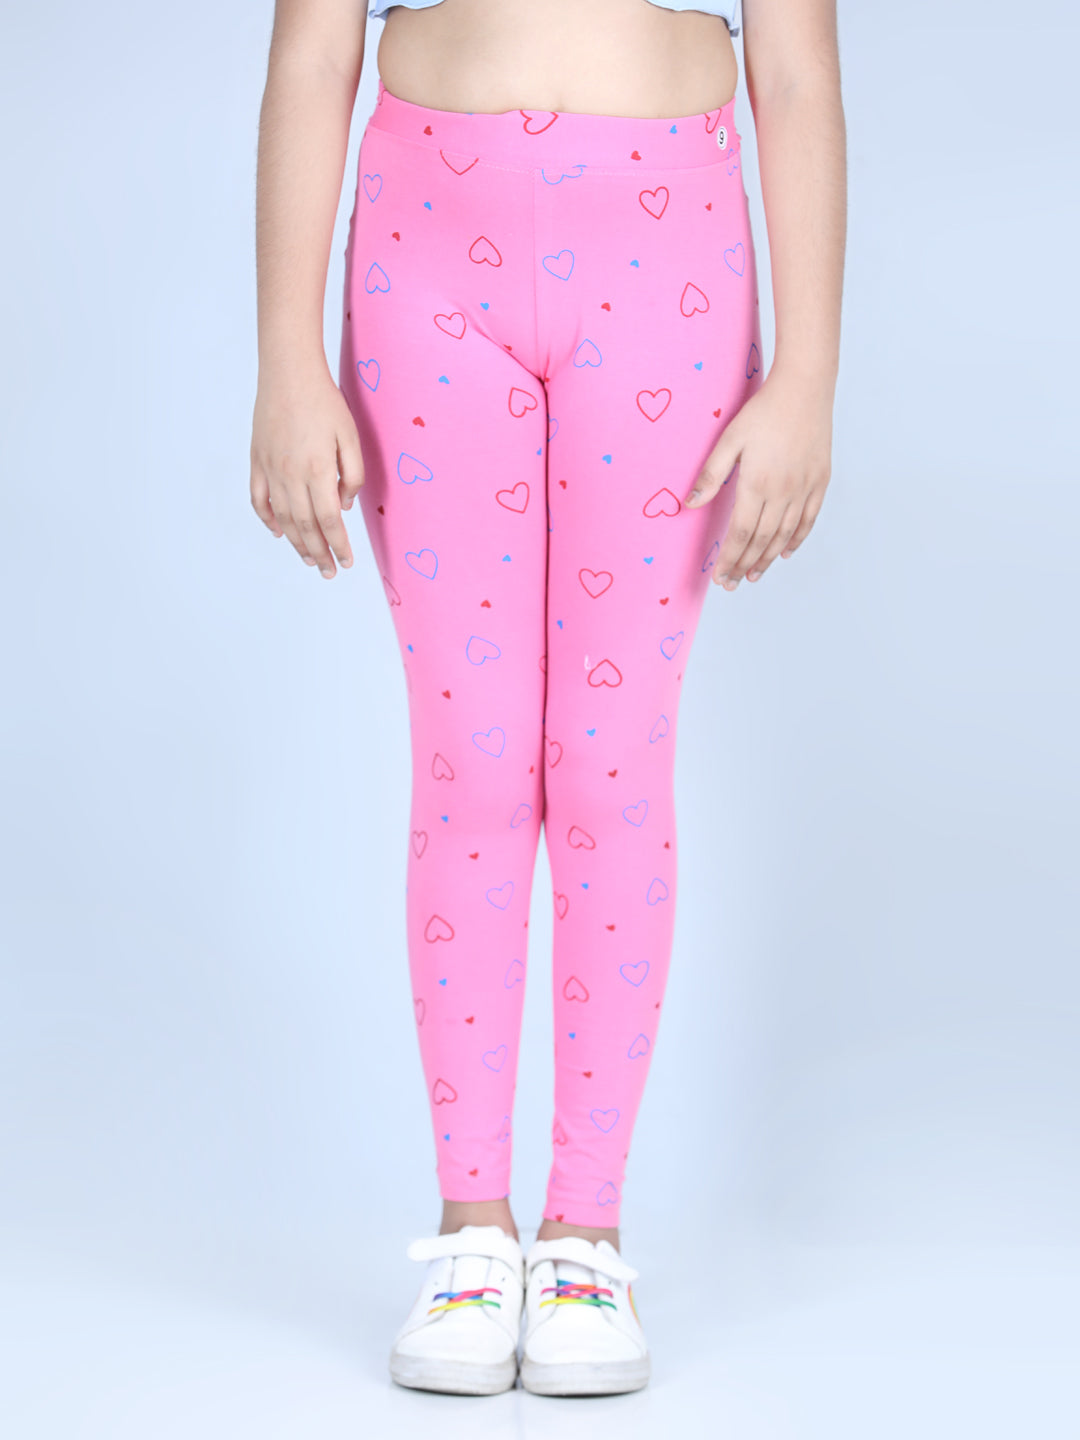 Girls Pack of 2 Printed Leggings with Flat Waistband- Pink & White